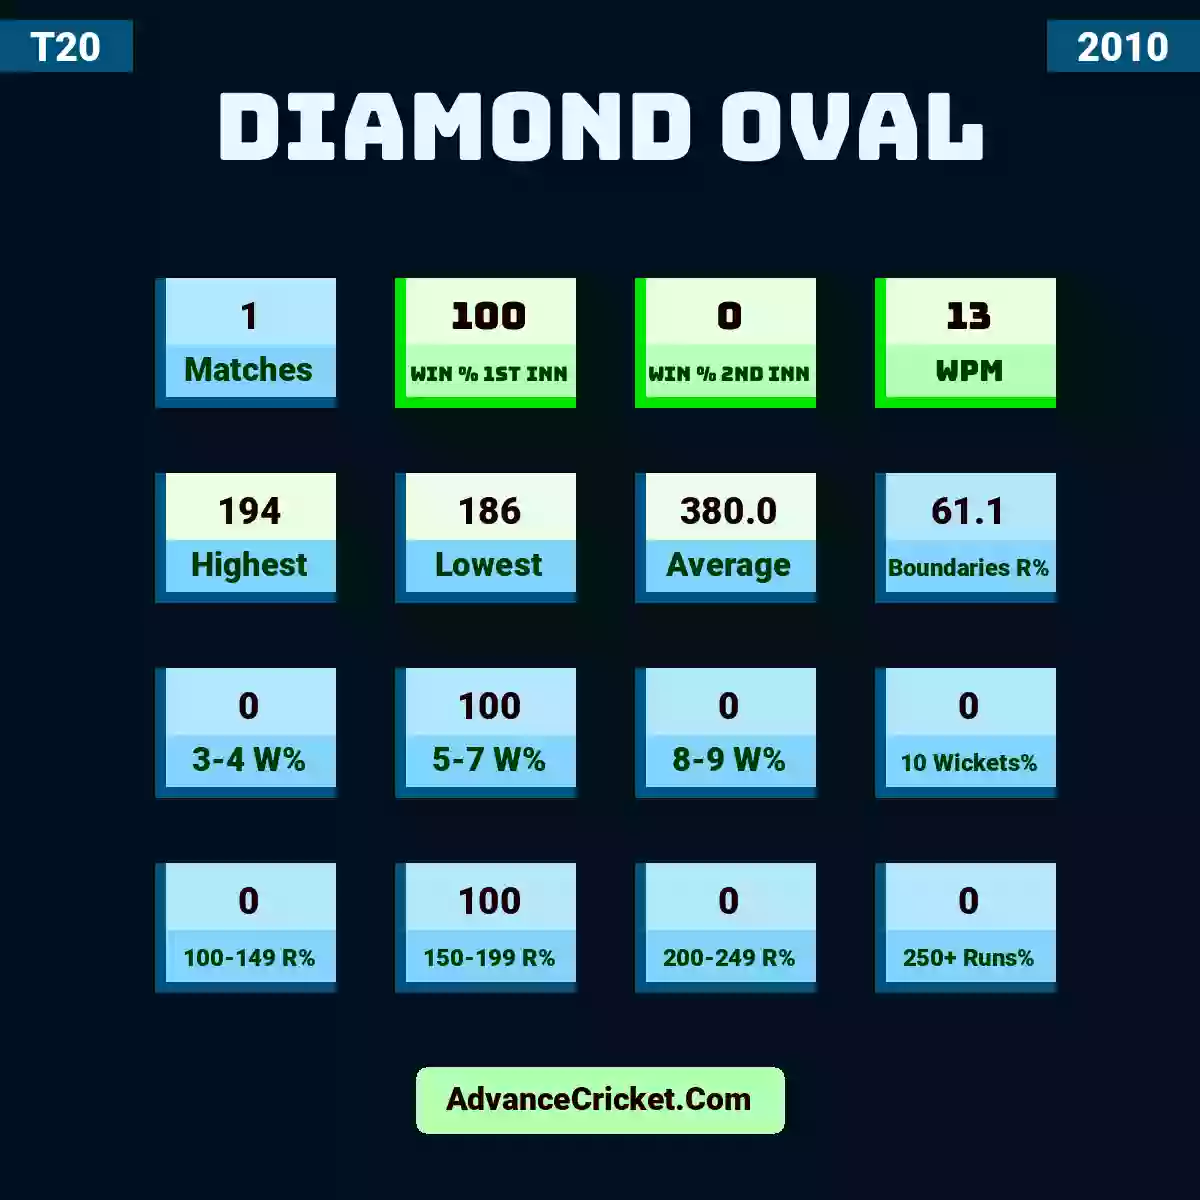 Image showing Diamond Oval with Matches: 1, Win % 1st Inn: 100, Win % 2nd Inn: 0, WPM: 13, Highest: 194, Lowest: 186, Average: 380.0, Boundaries R%: 61.1, 3-4 W%: 0, 5-7 W%: 100, 8-9 W%: 0, 10 Wickets%: 0, 100-149 R%: 0, 150-199 R%: 100, 200-249 R%: 0, 250+ Runs%: 0.